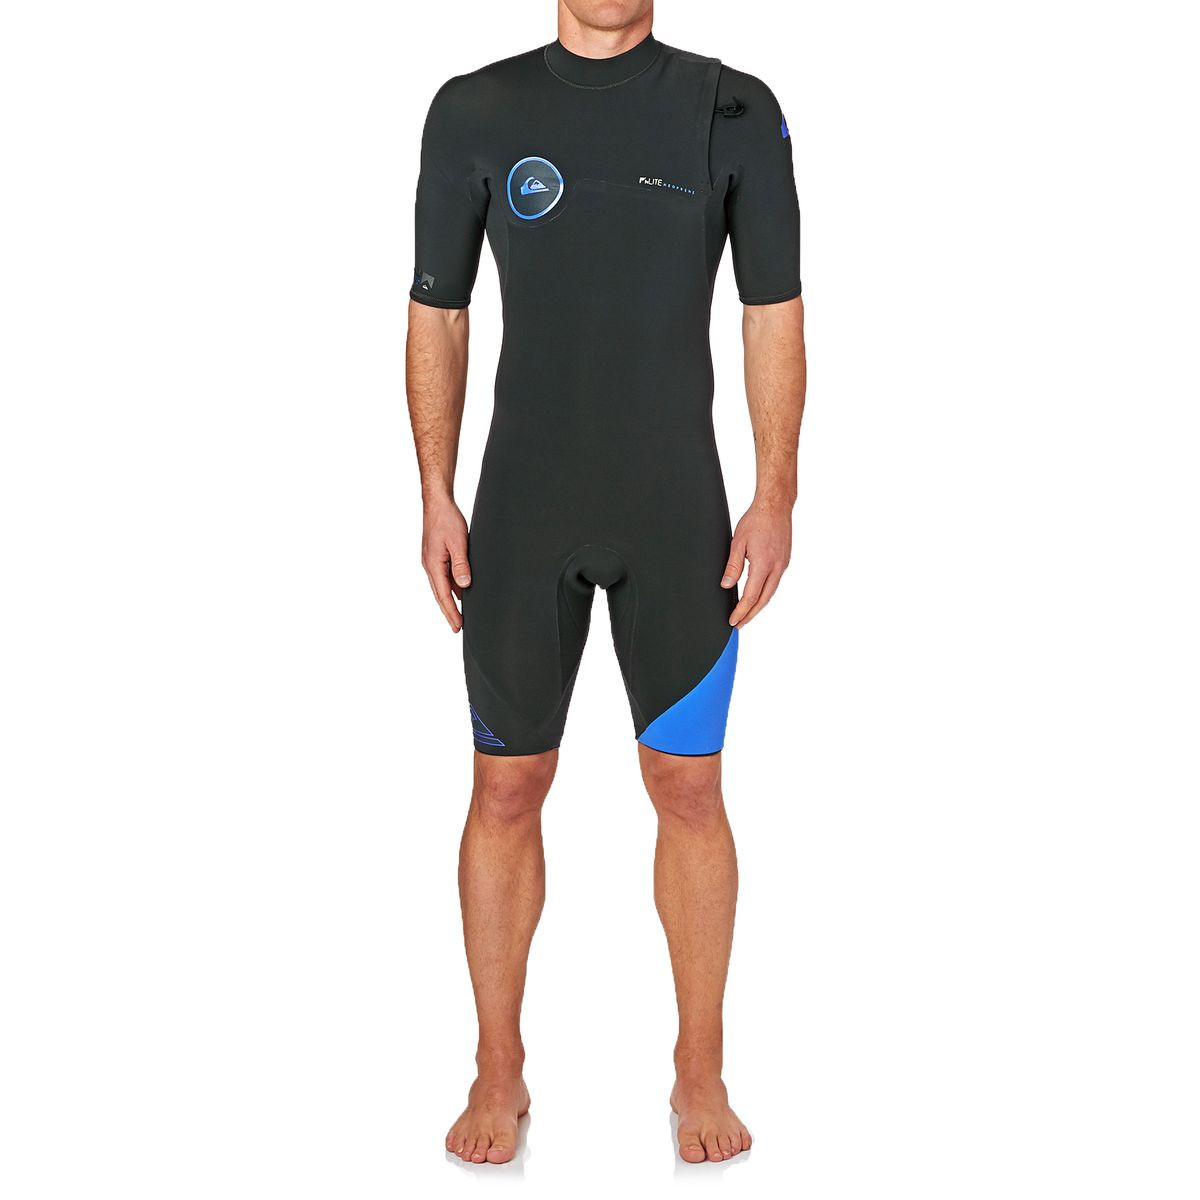 Quiksilver Syncro 2mm 2017 Zipperless Short Sleeve Shorty Wetsuit - Graphite/ Cyan